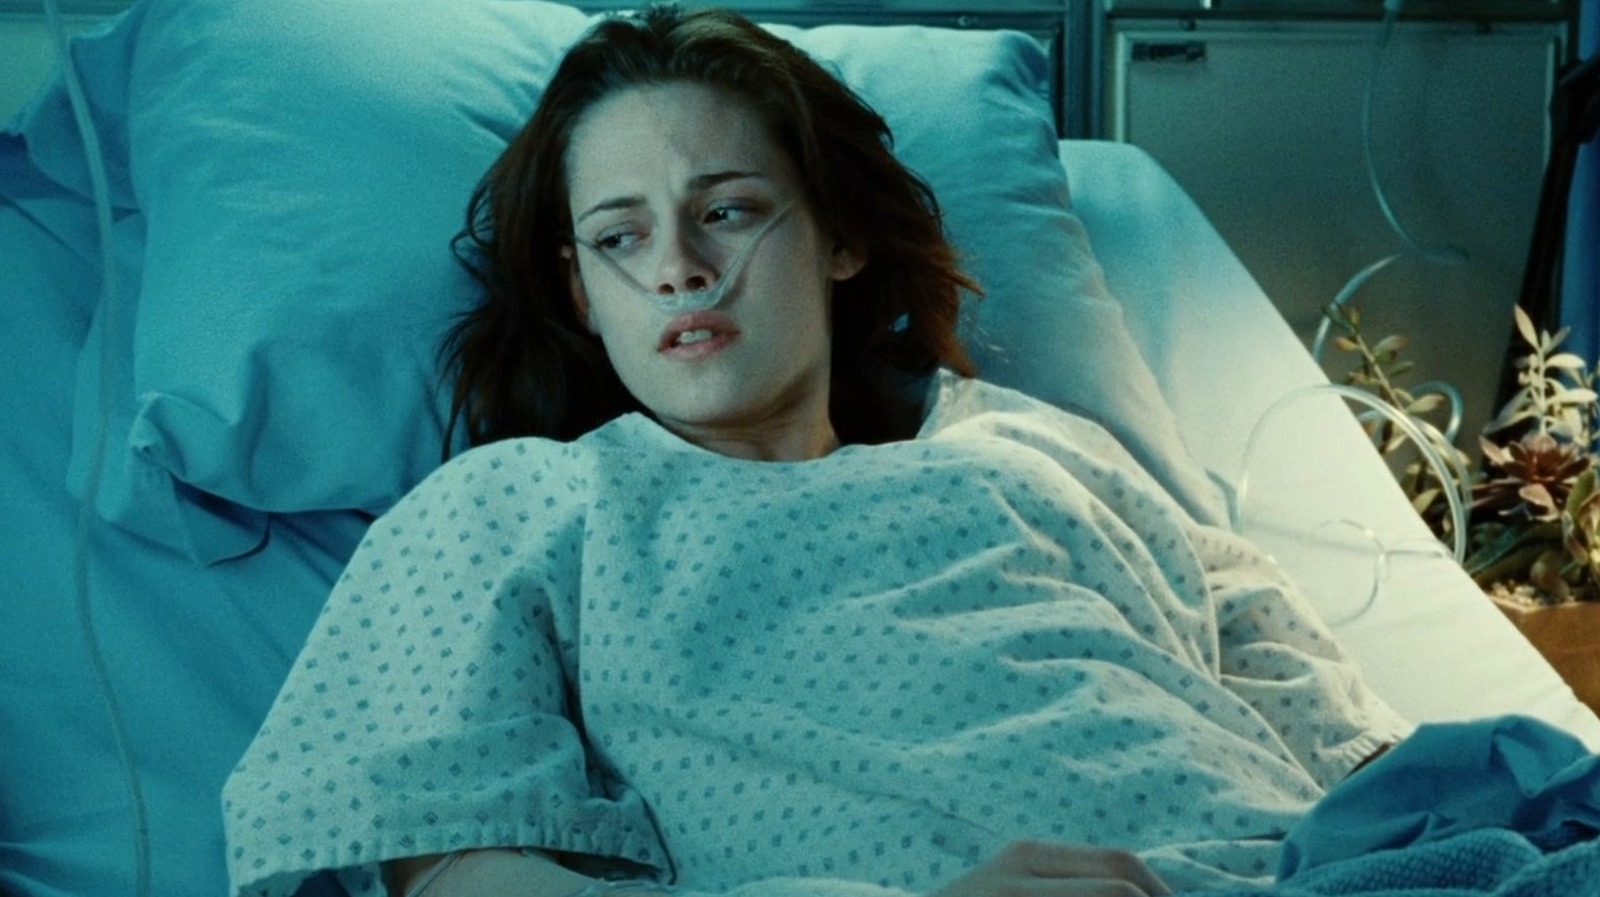 Twilight: The Major Bella Swan Mistake You Won't Be Able To Unsee